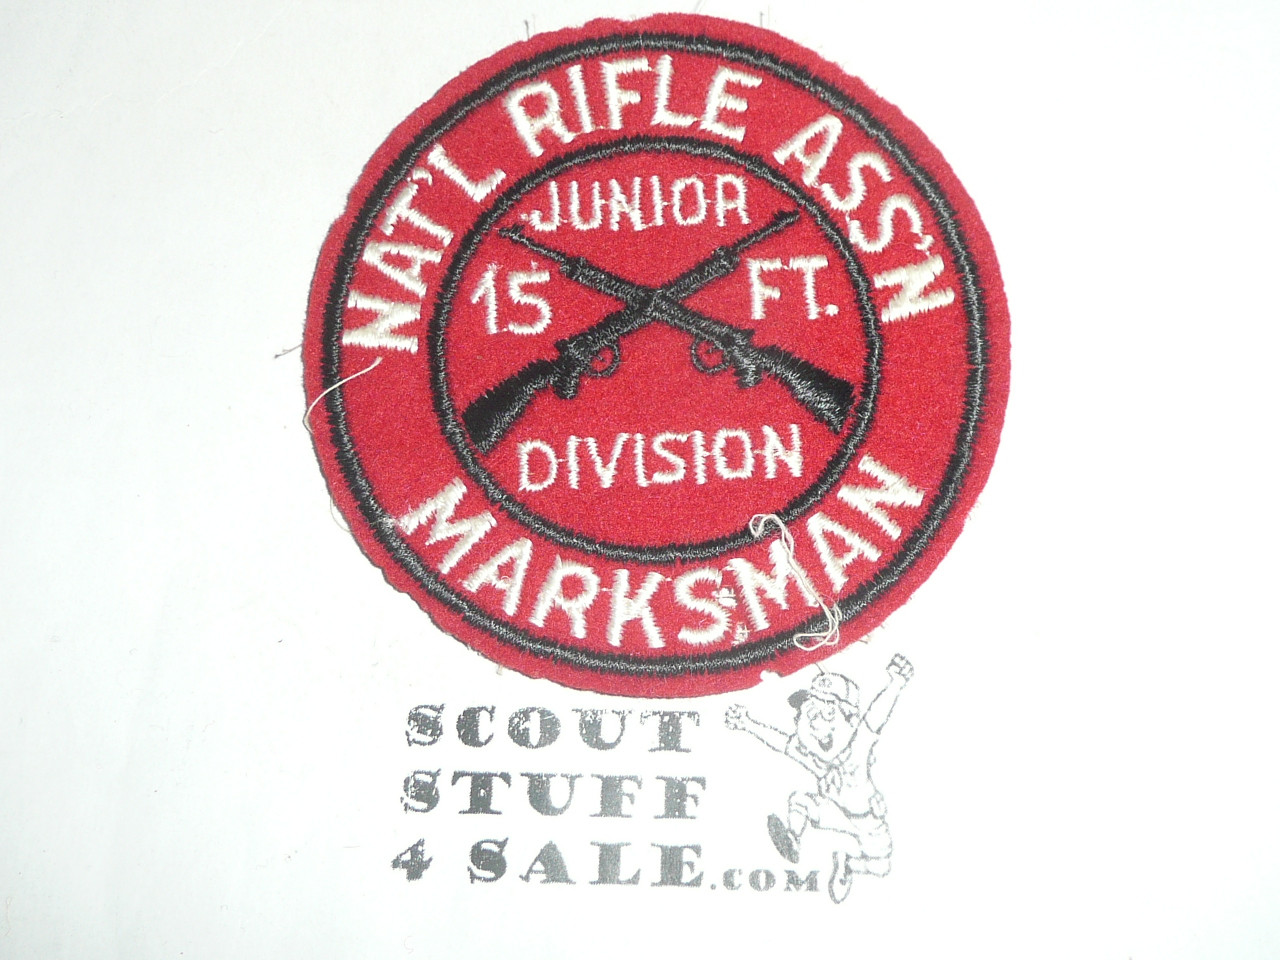 National Rifle Association NRA Junior Division 15 feet Marksman Felt Patch, used in Scout Camps